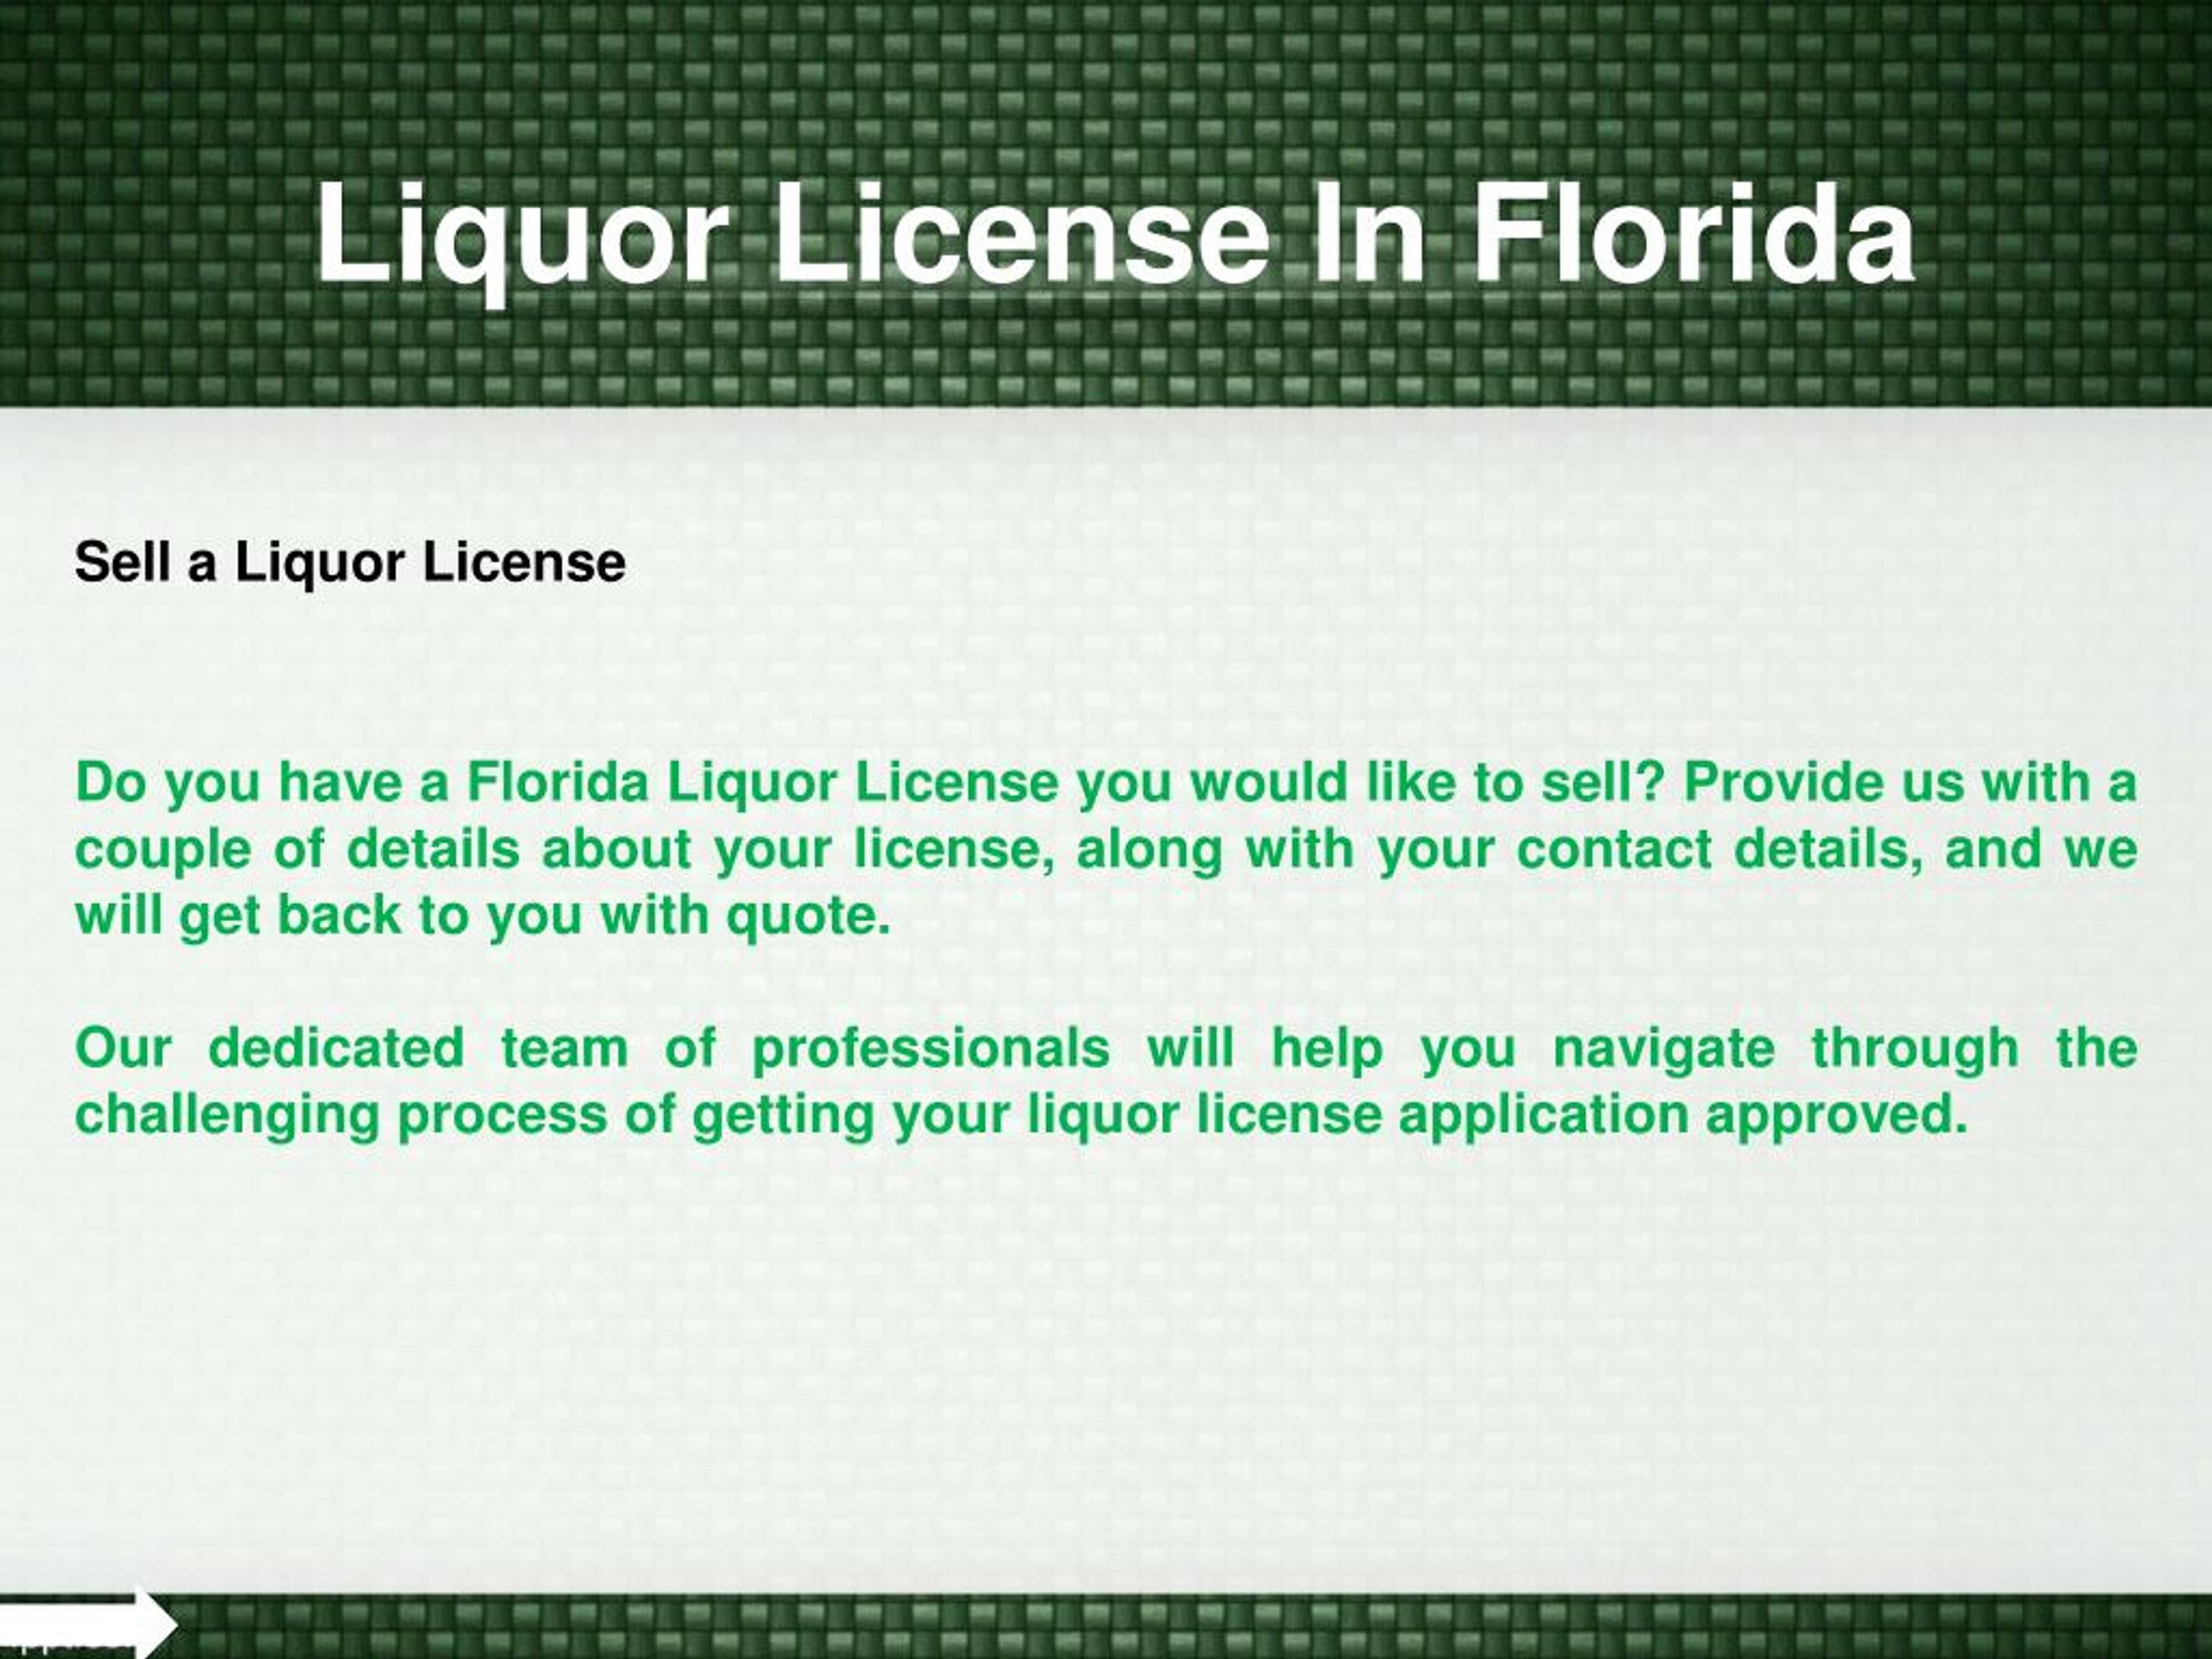 PPT - Liquor License In Florida PowerPoint Presentation, free download ...